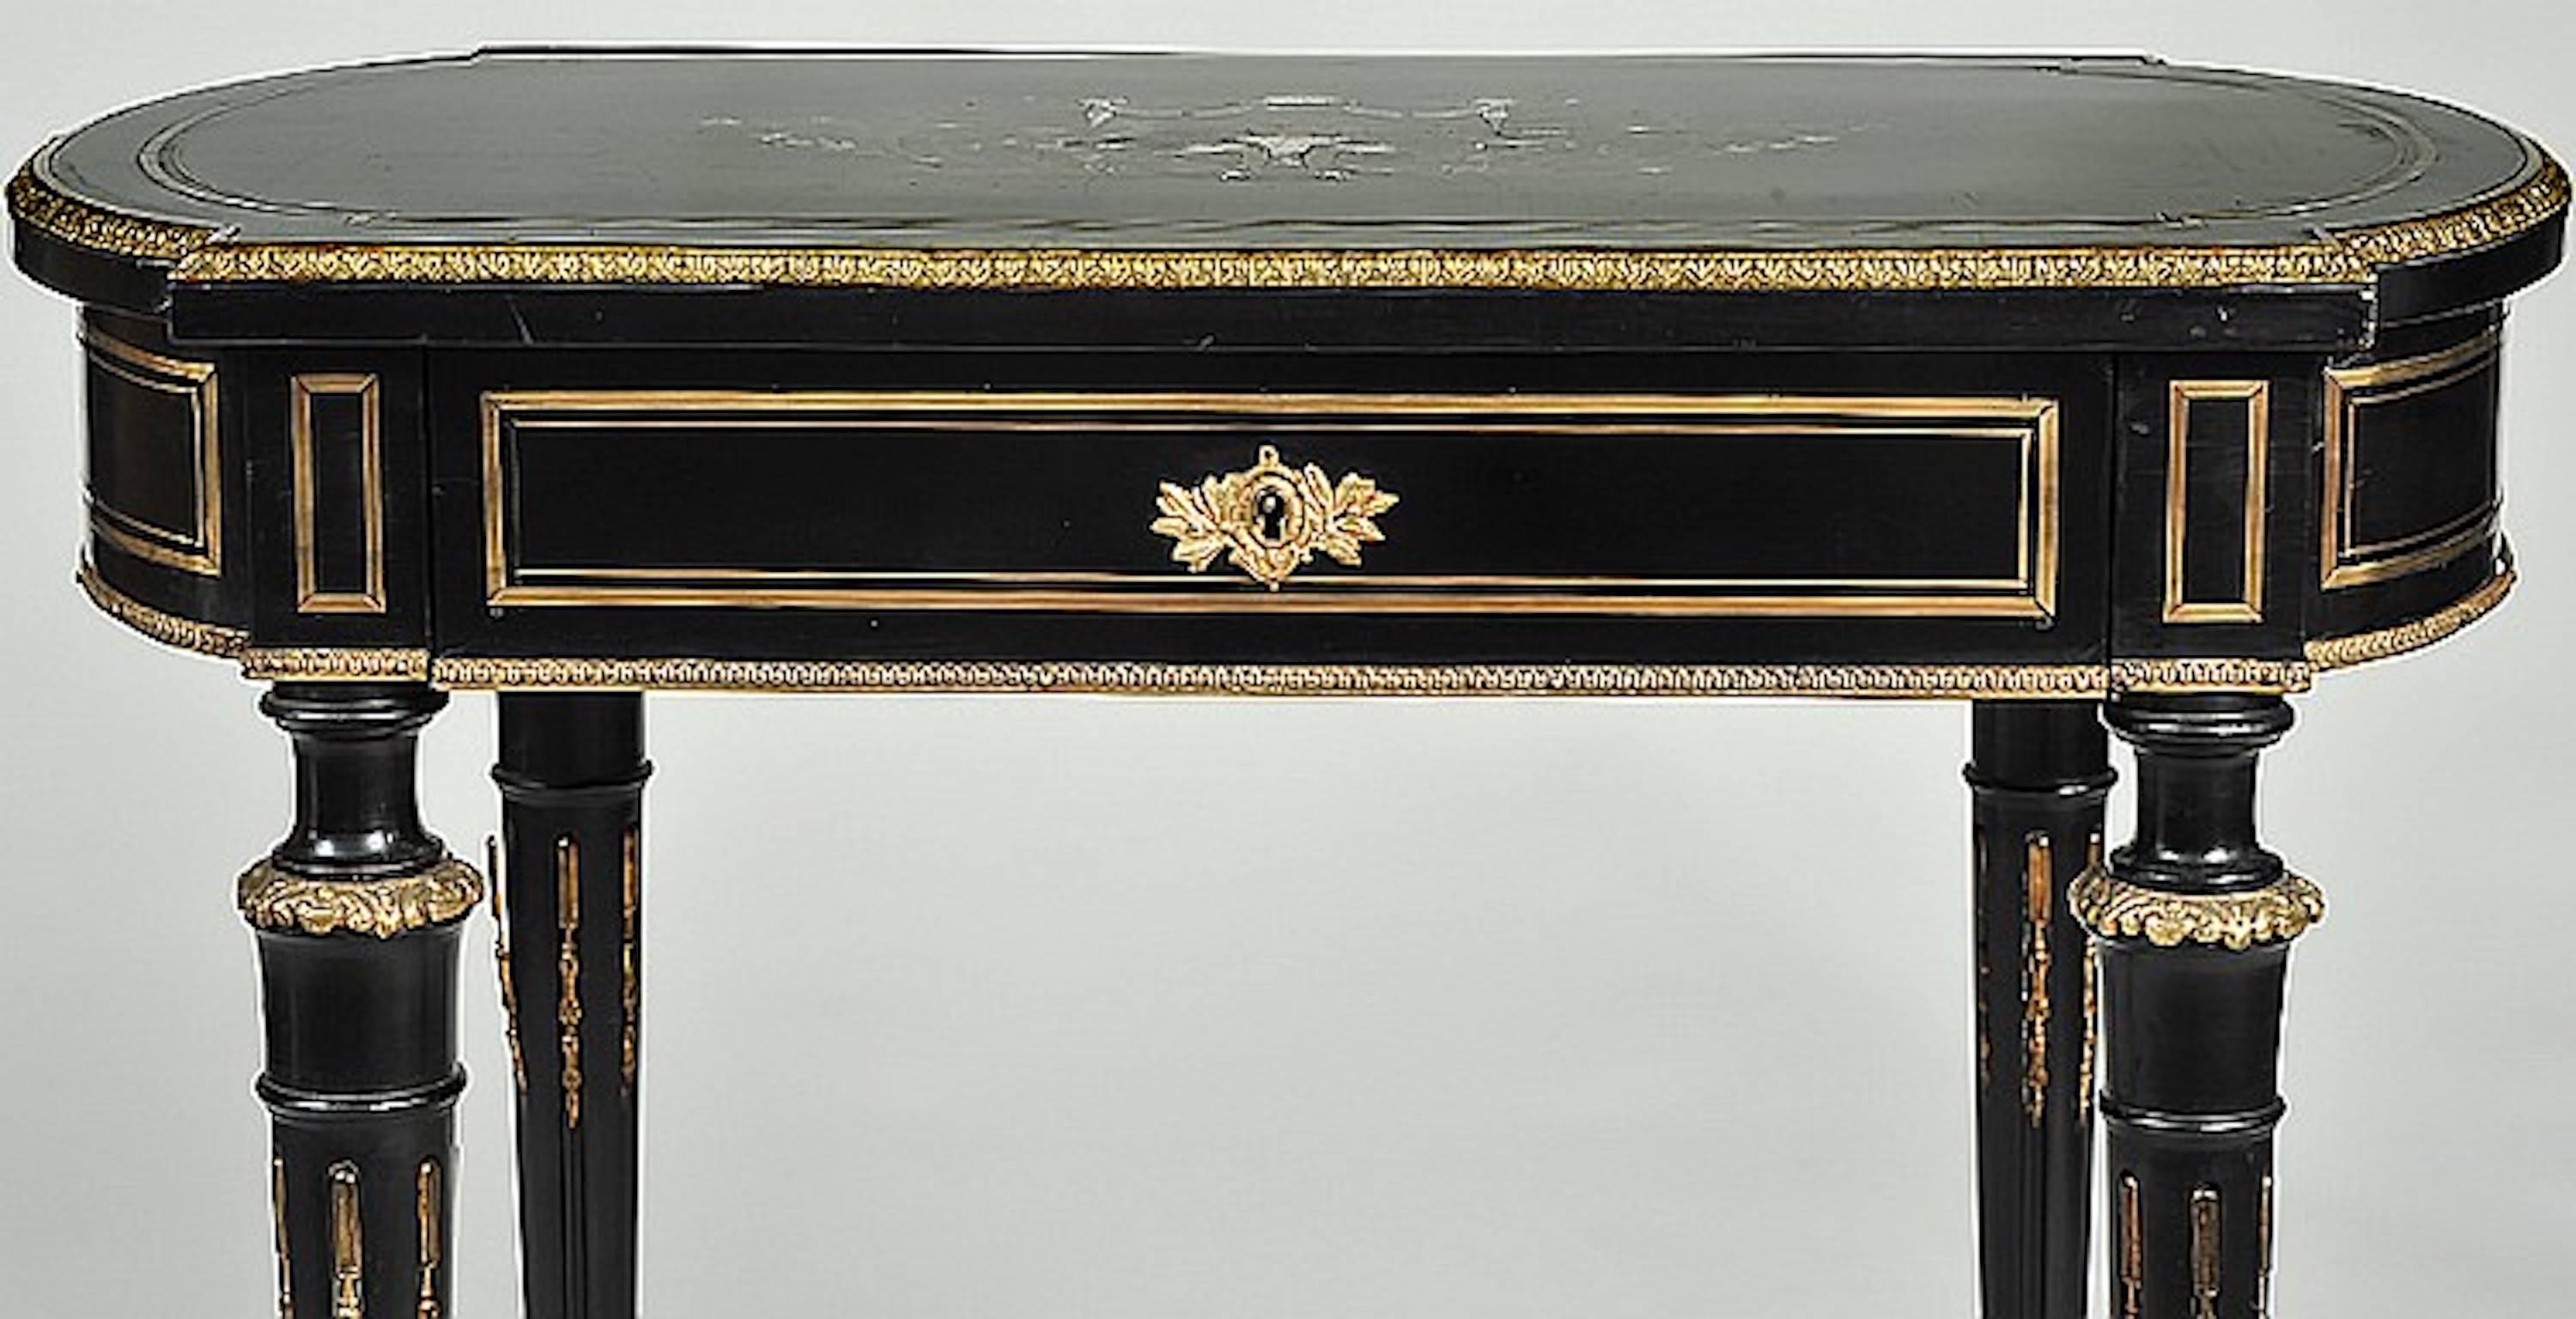 Fine French late 19th century boulle style dressing table. The brass and mother-of-pearl inlaid hinged top opening to a mirror and various compartments, raised on reeded legs joined by shaped stretchers. Measures: Height 29 1/2